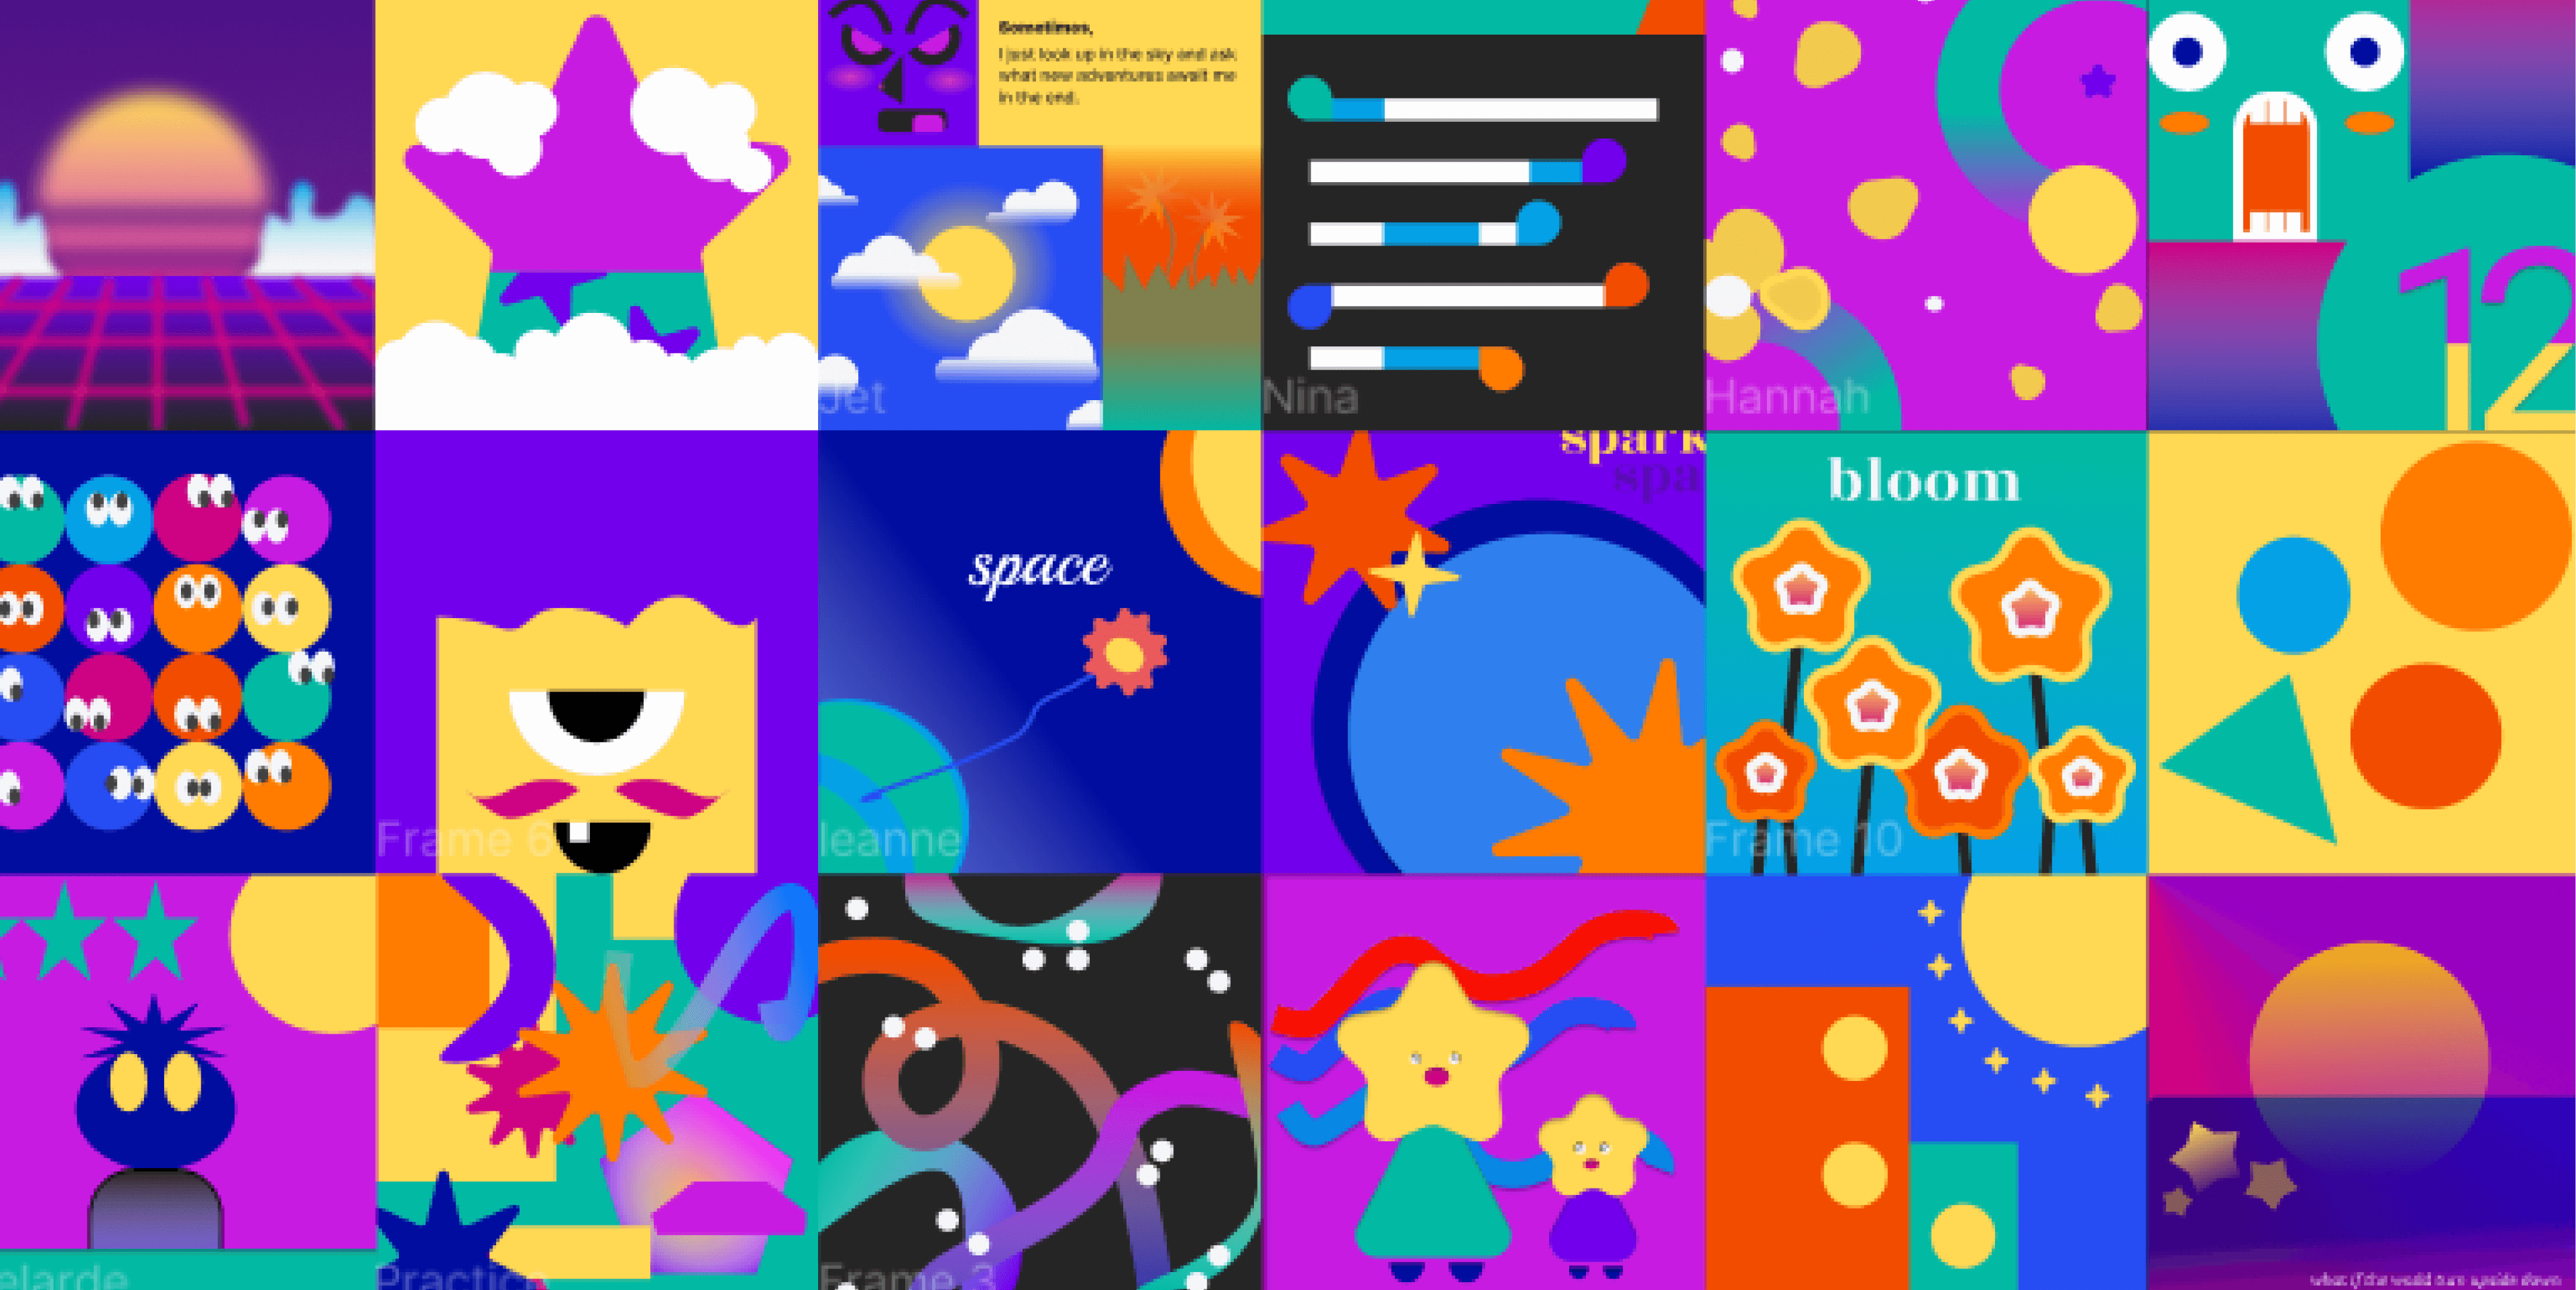 A colorful quilt co-created on Figma by workshop participants